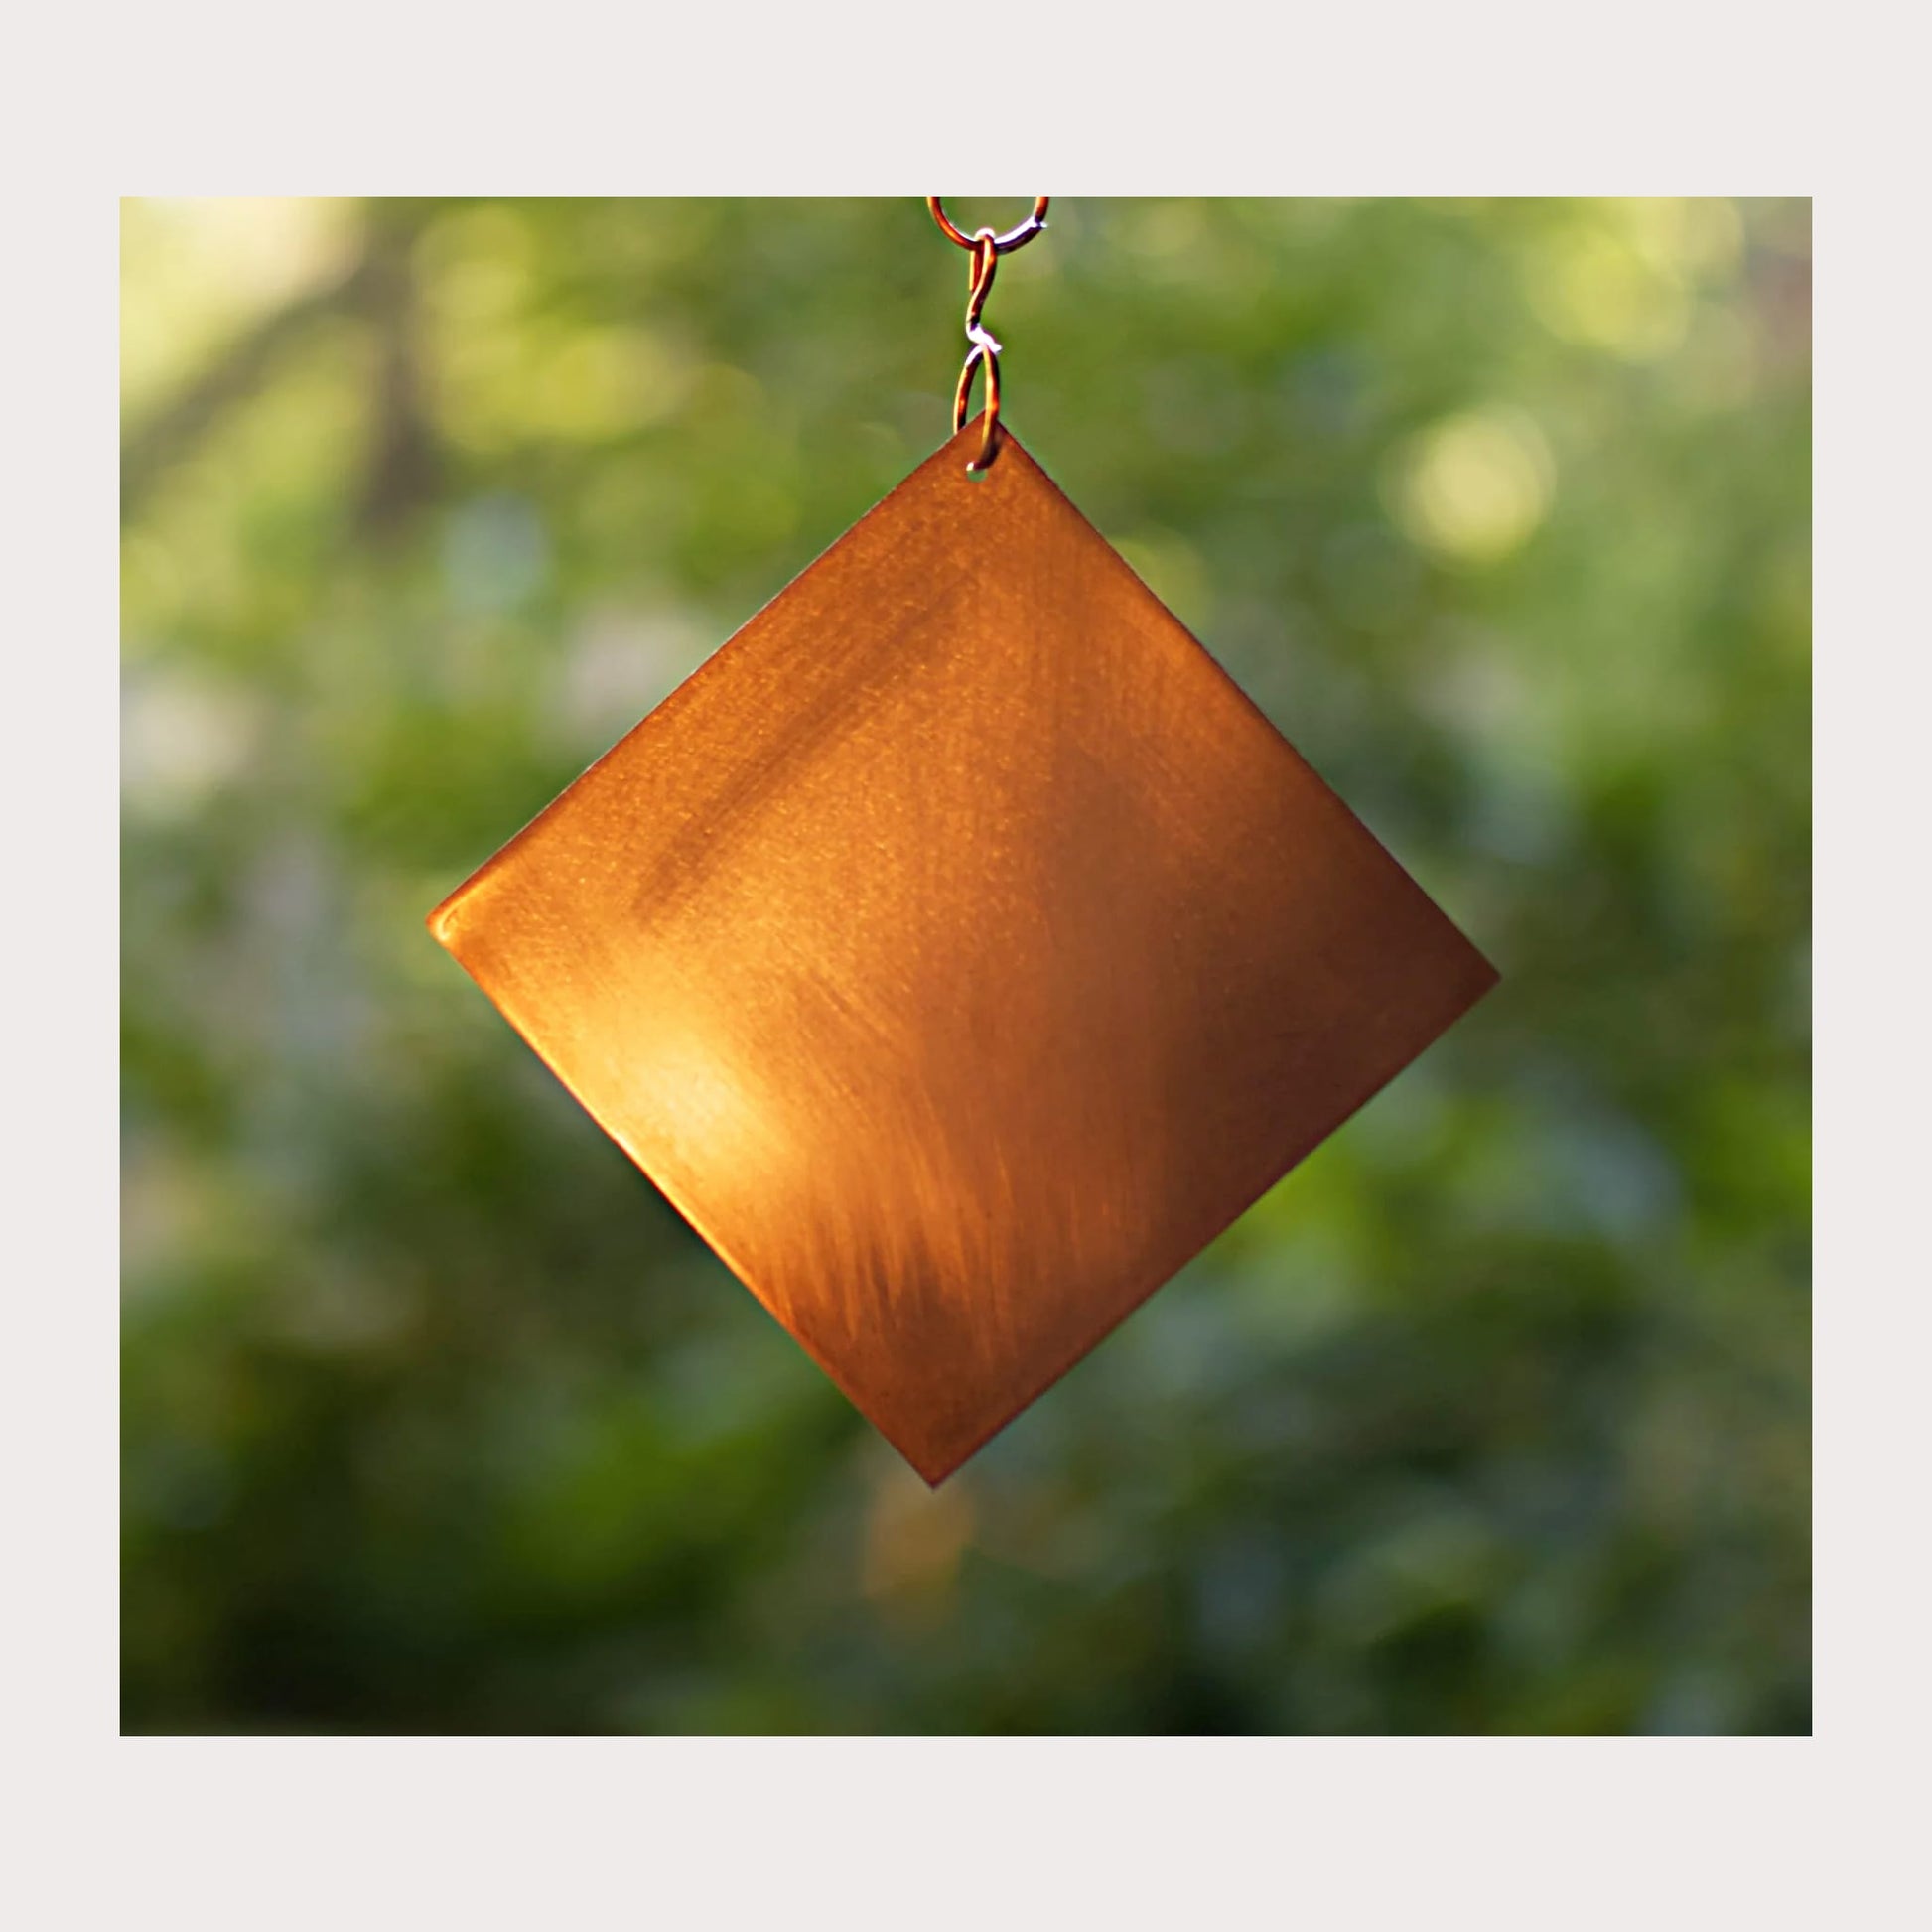 handcrafted copper wind chime sail.